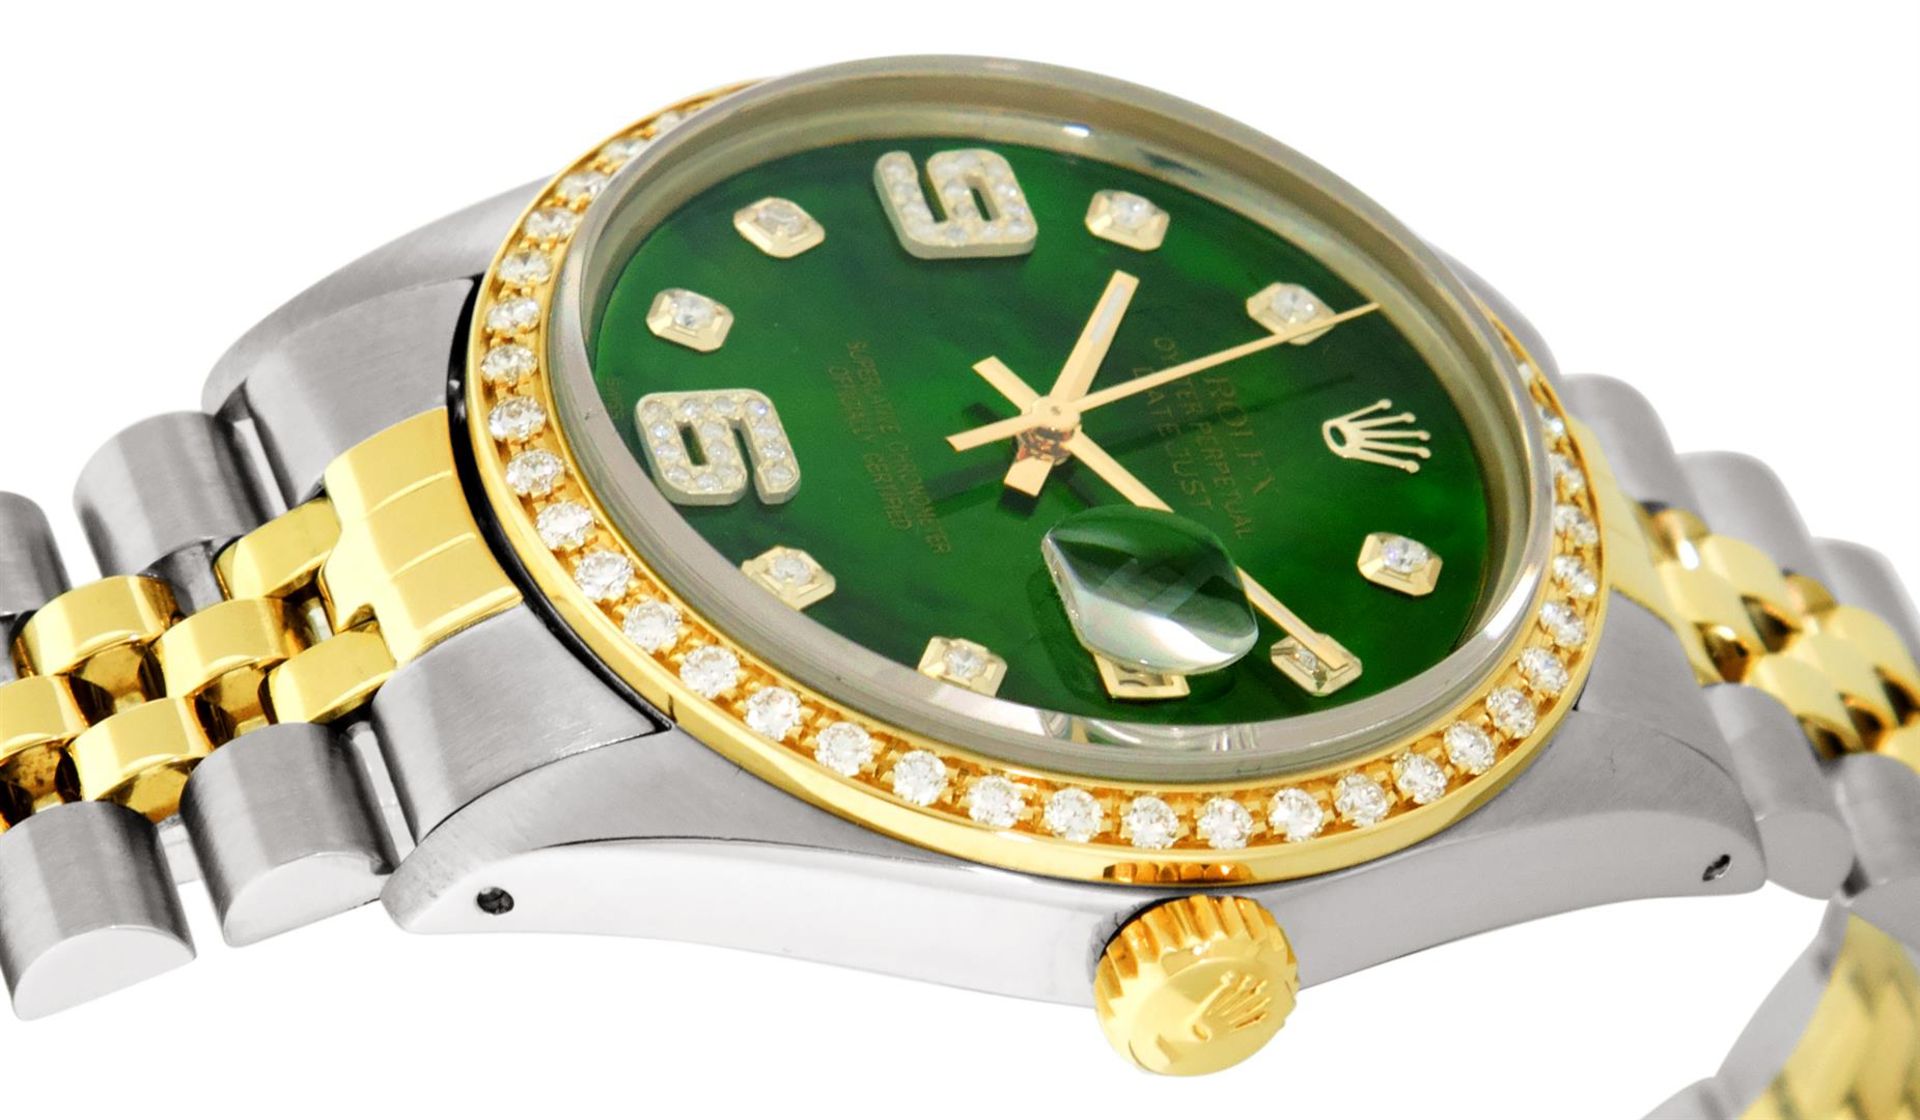 Rolex 2 Tone YG/SS Green Diamond Oyster Perpetual Datejust Wristwatch 36MM - Image 9 of 9